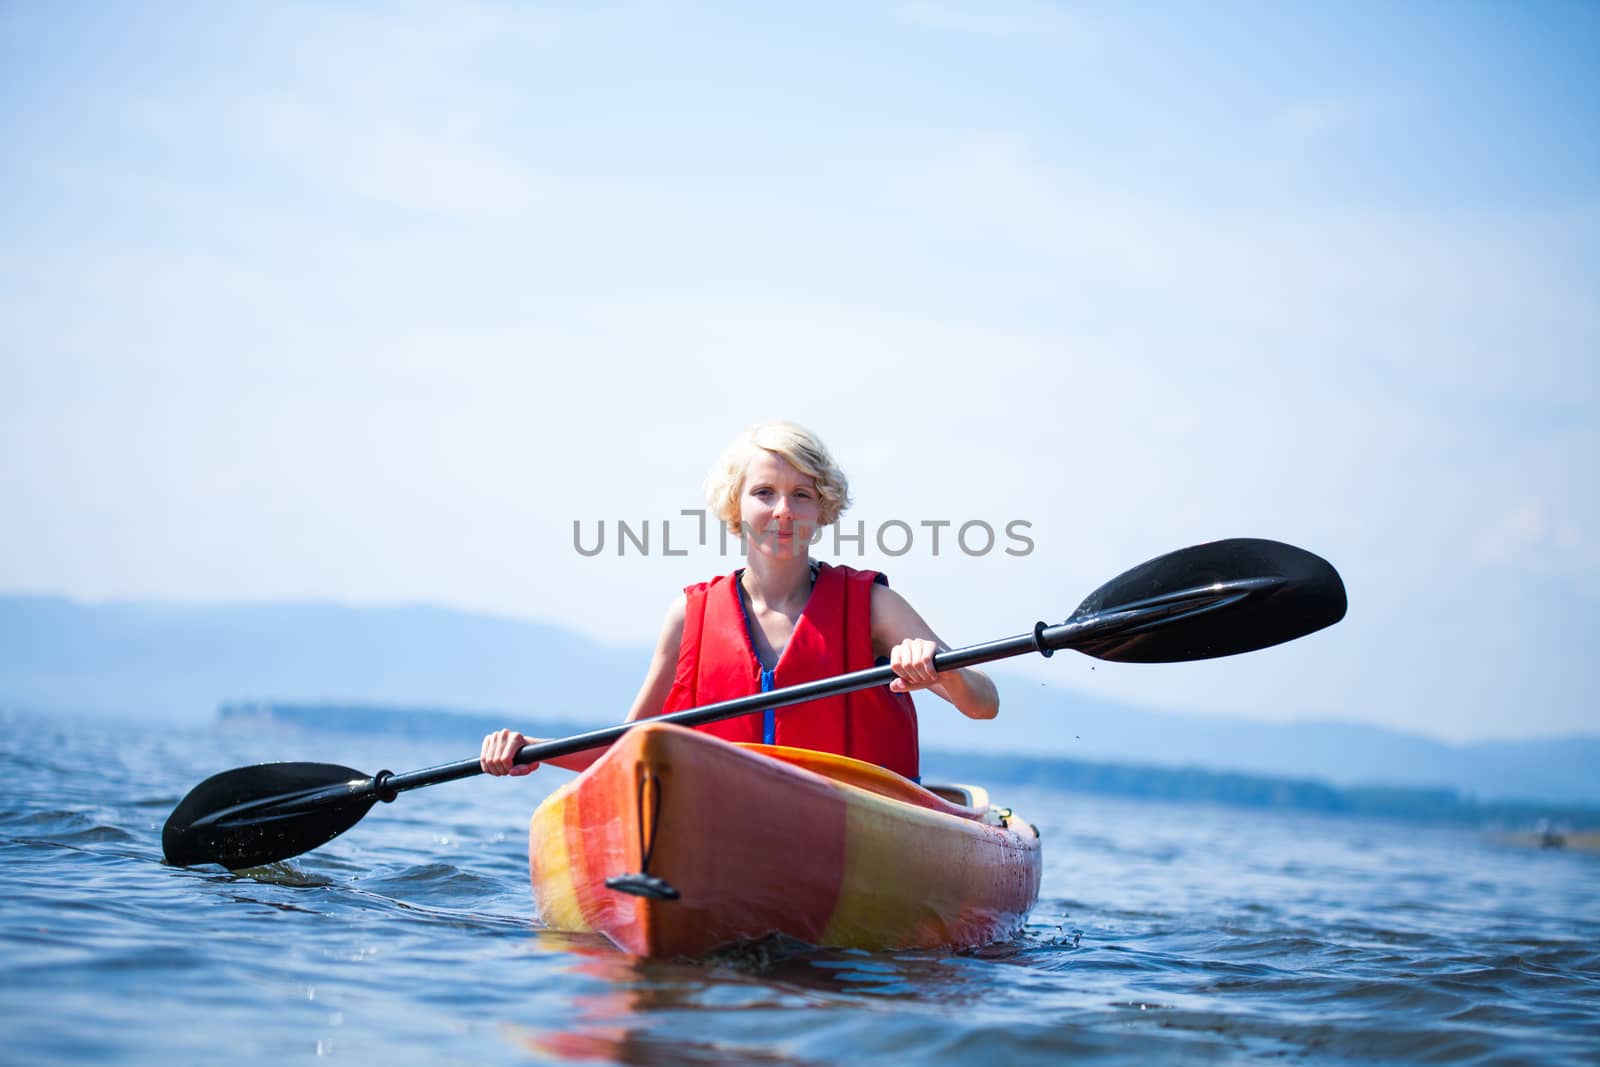 Woman With Safety Vest Kayaking Alone on a Calm Sea by aetb